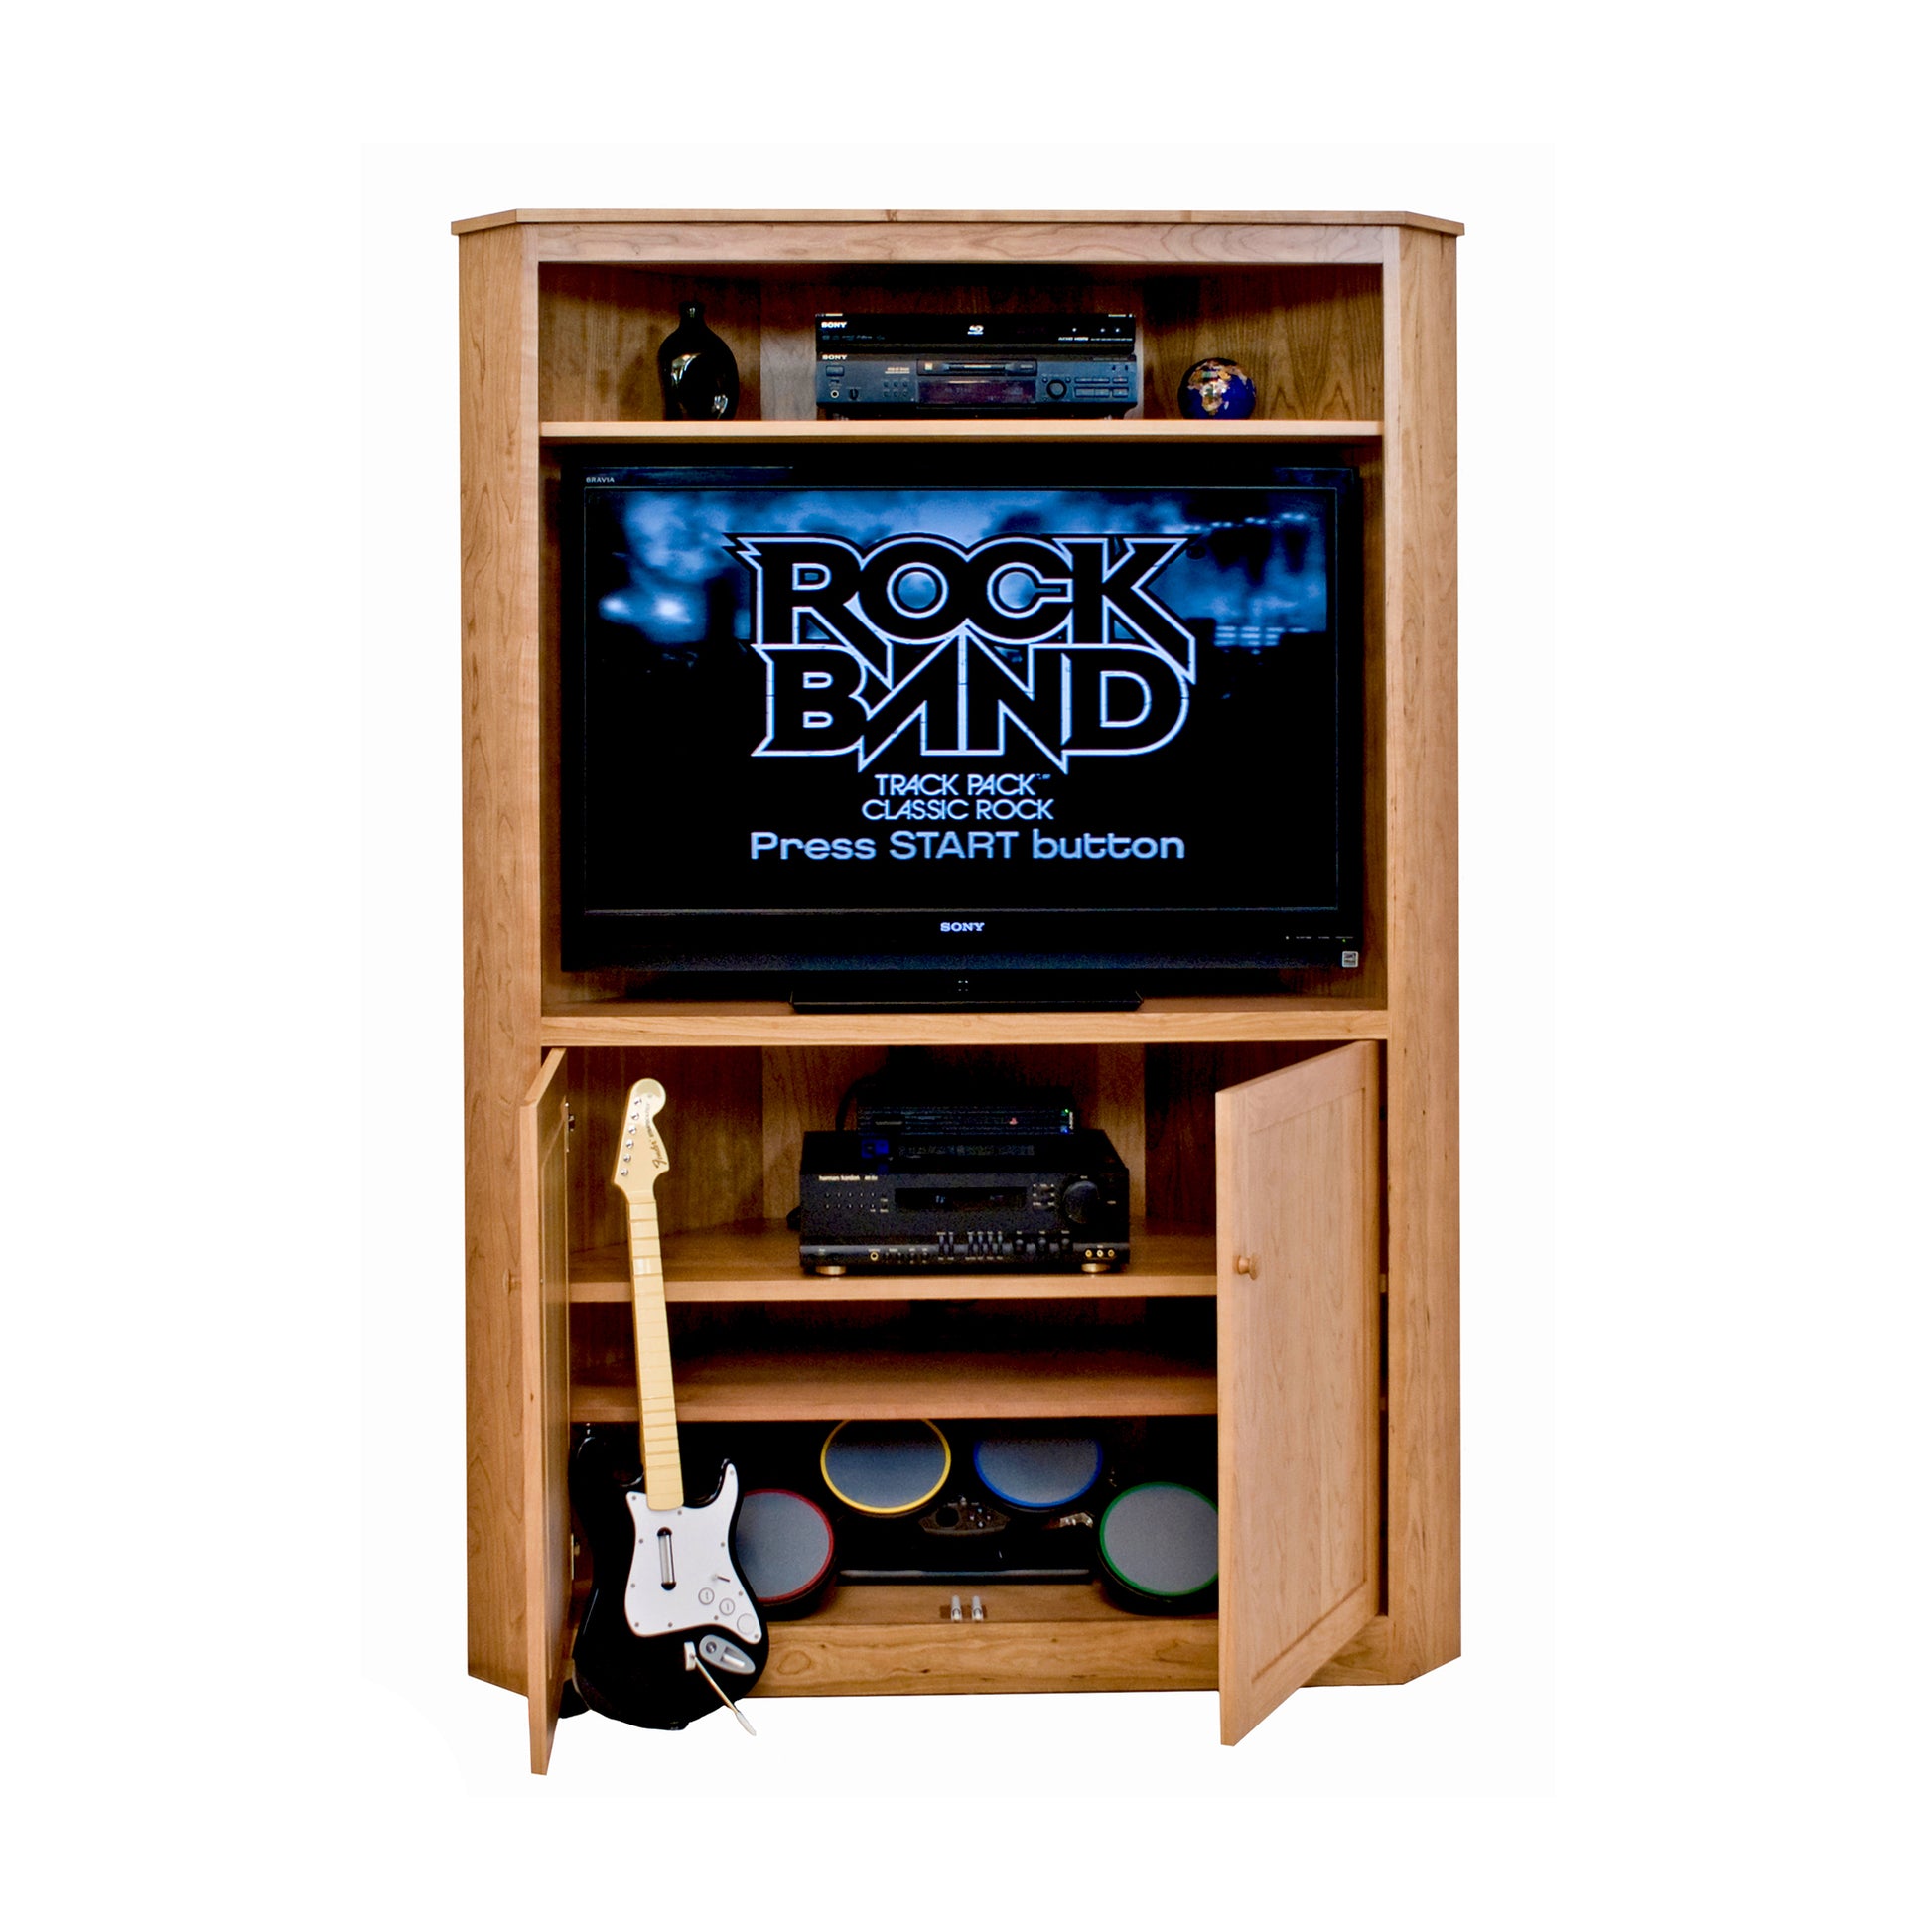 This New England Shaker Corner Entertainment Center from Lyndon Furniture serves as a media storage solution for your rock band collection.